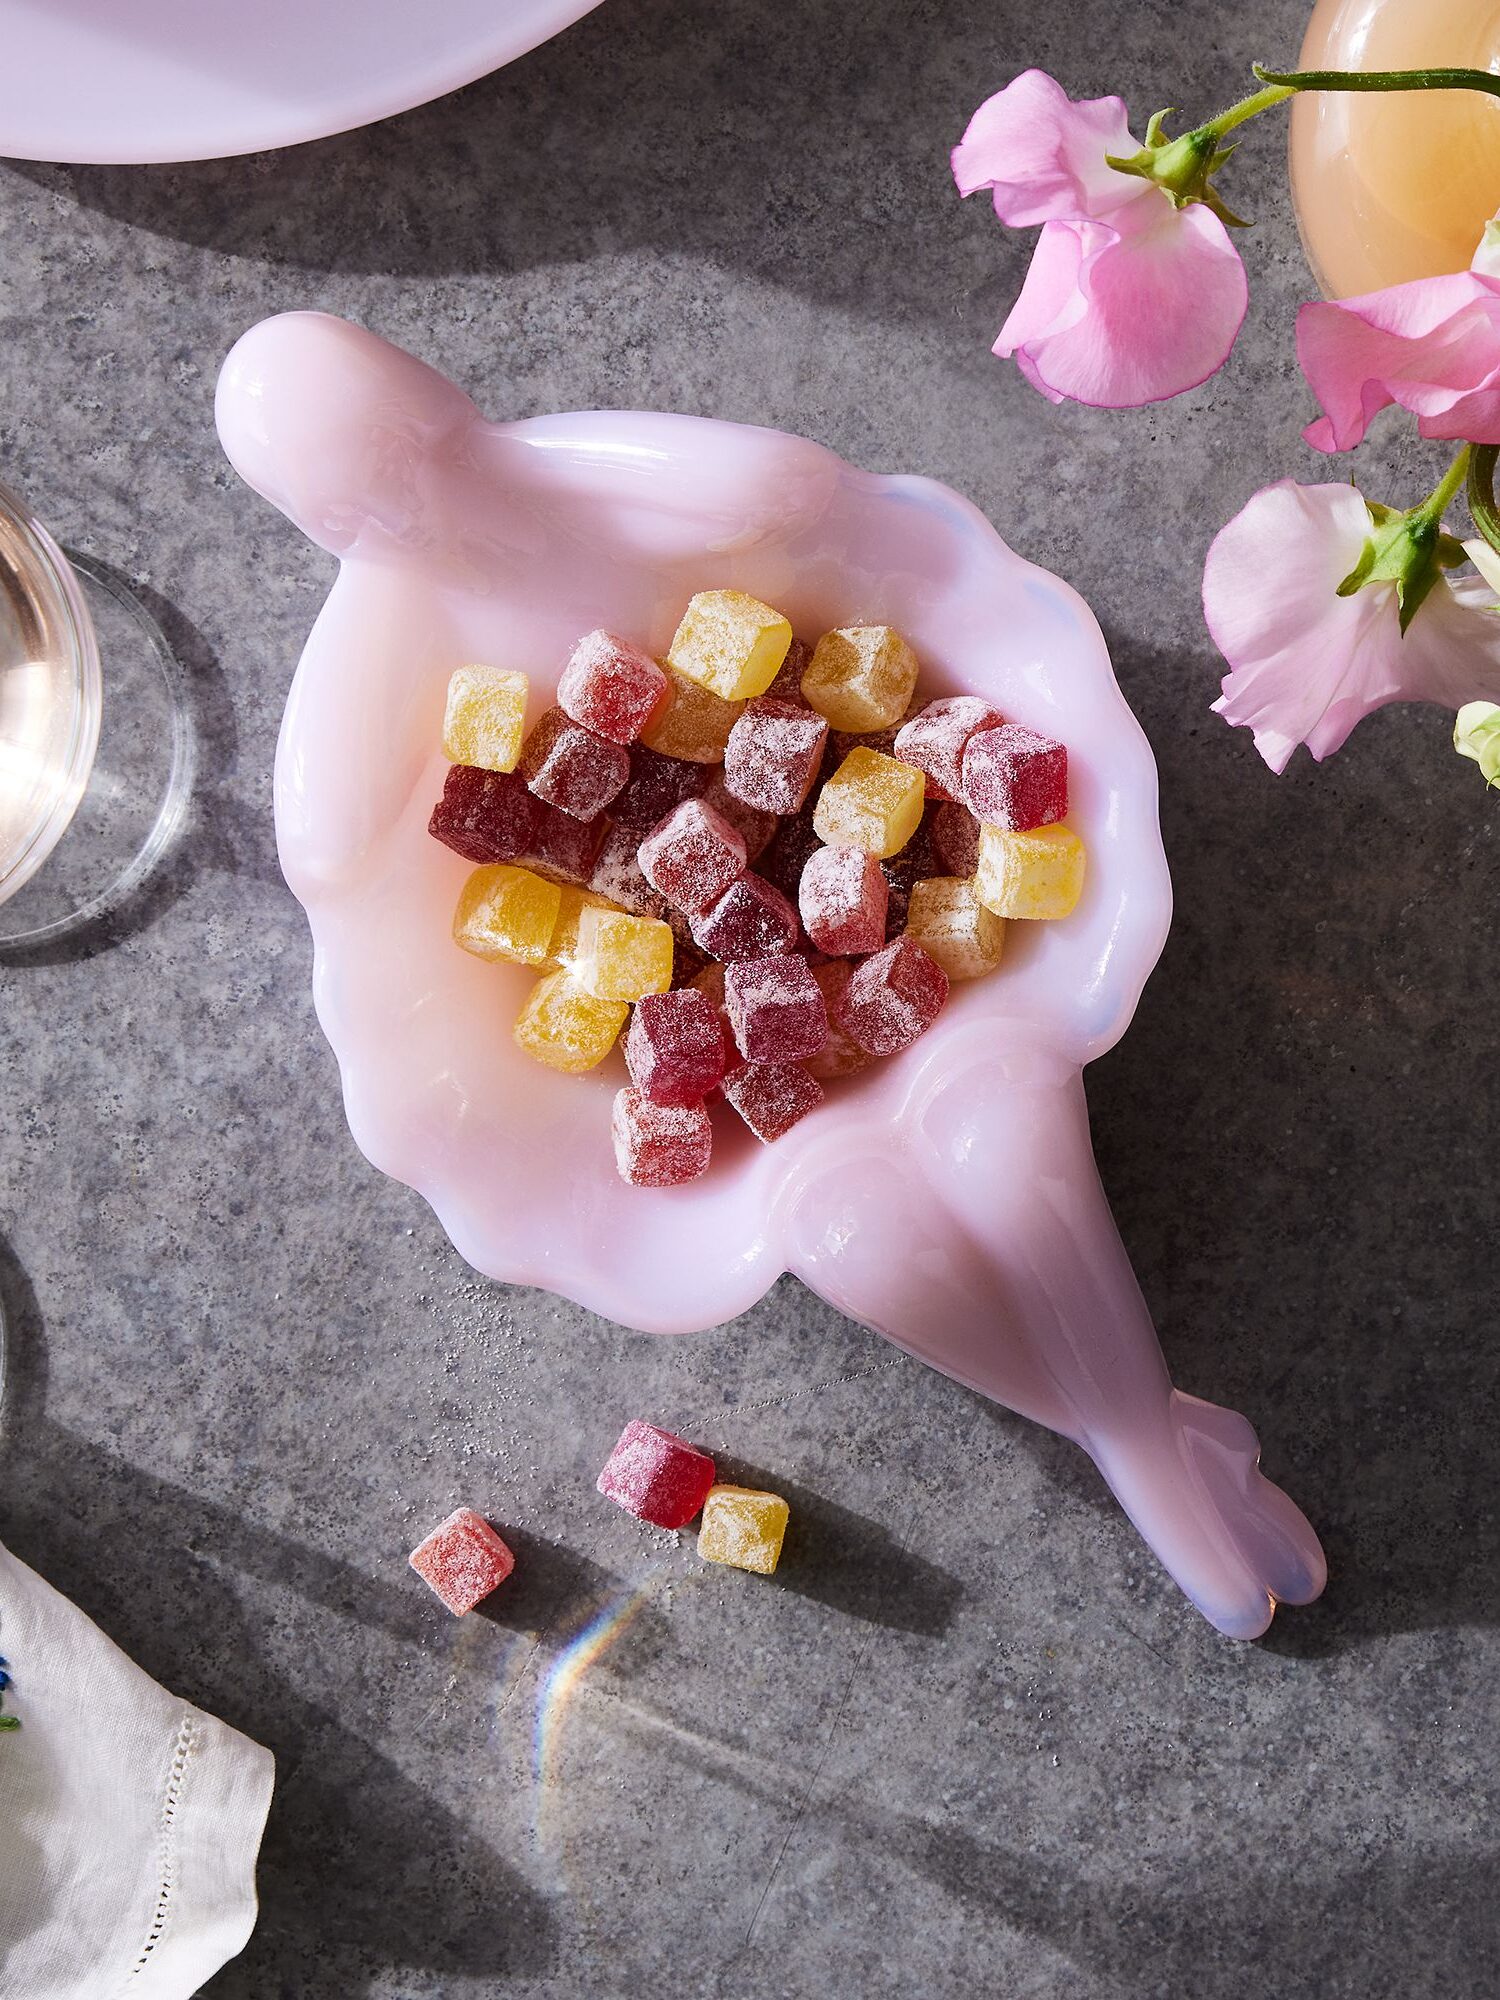 A pink glass shell-shaped dish filled with colorful sugared fruit jelly cubes, accompanied by pink drinks and floral décor on a grey surface.